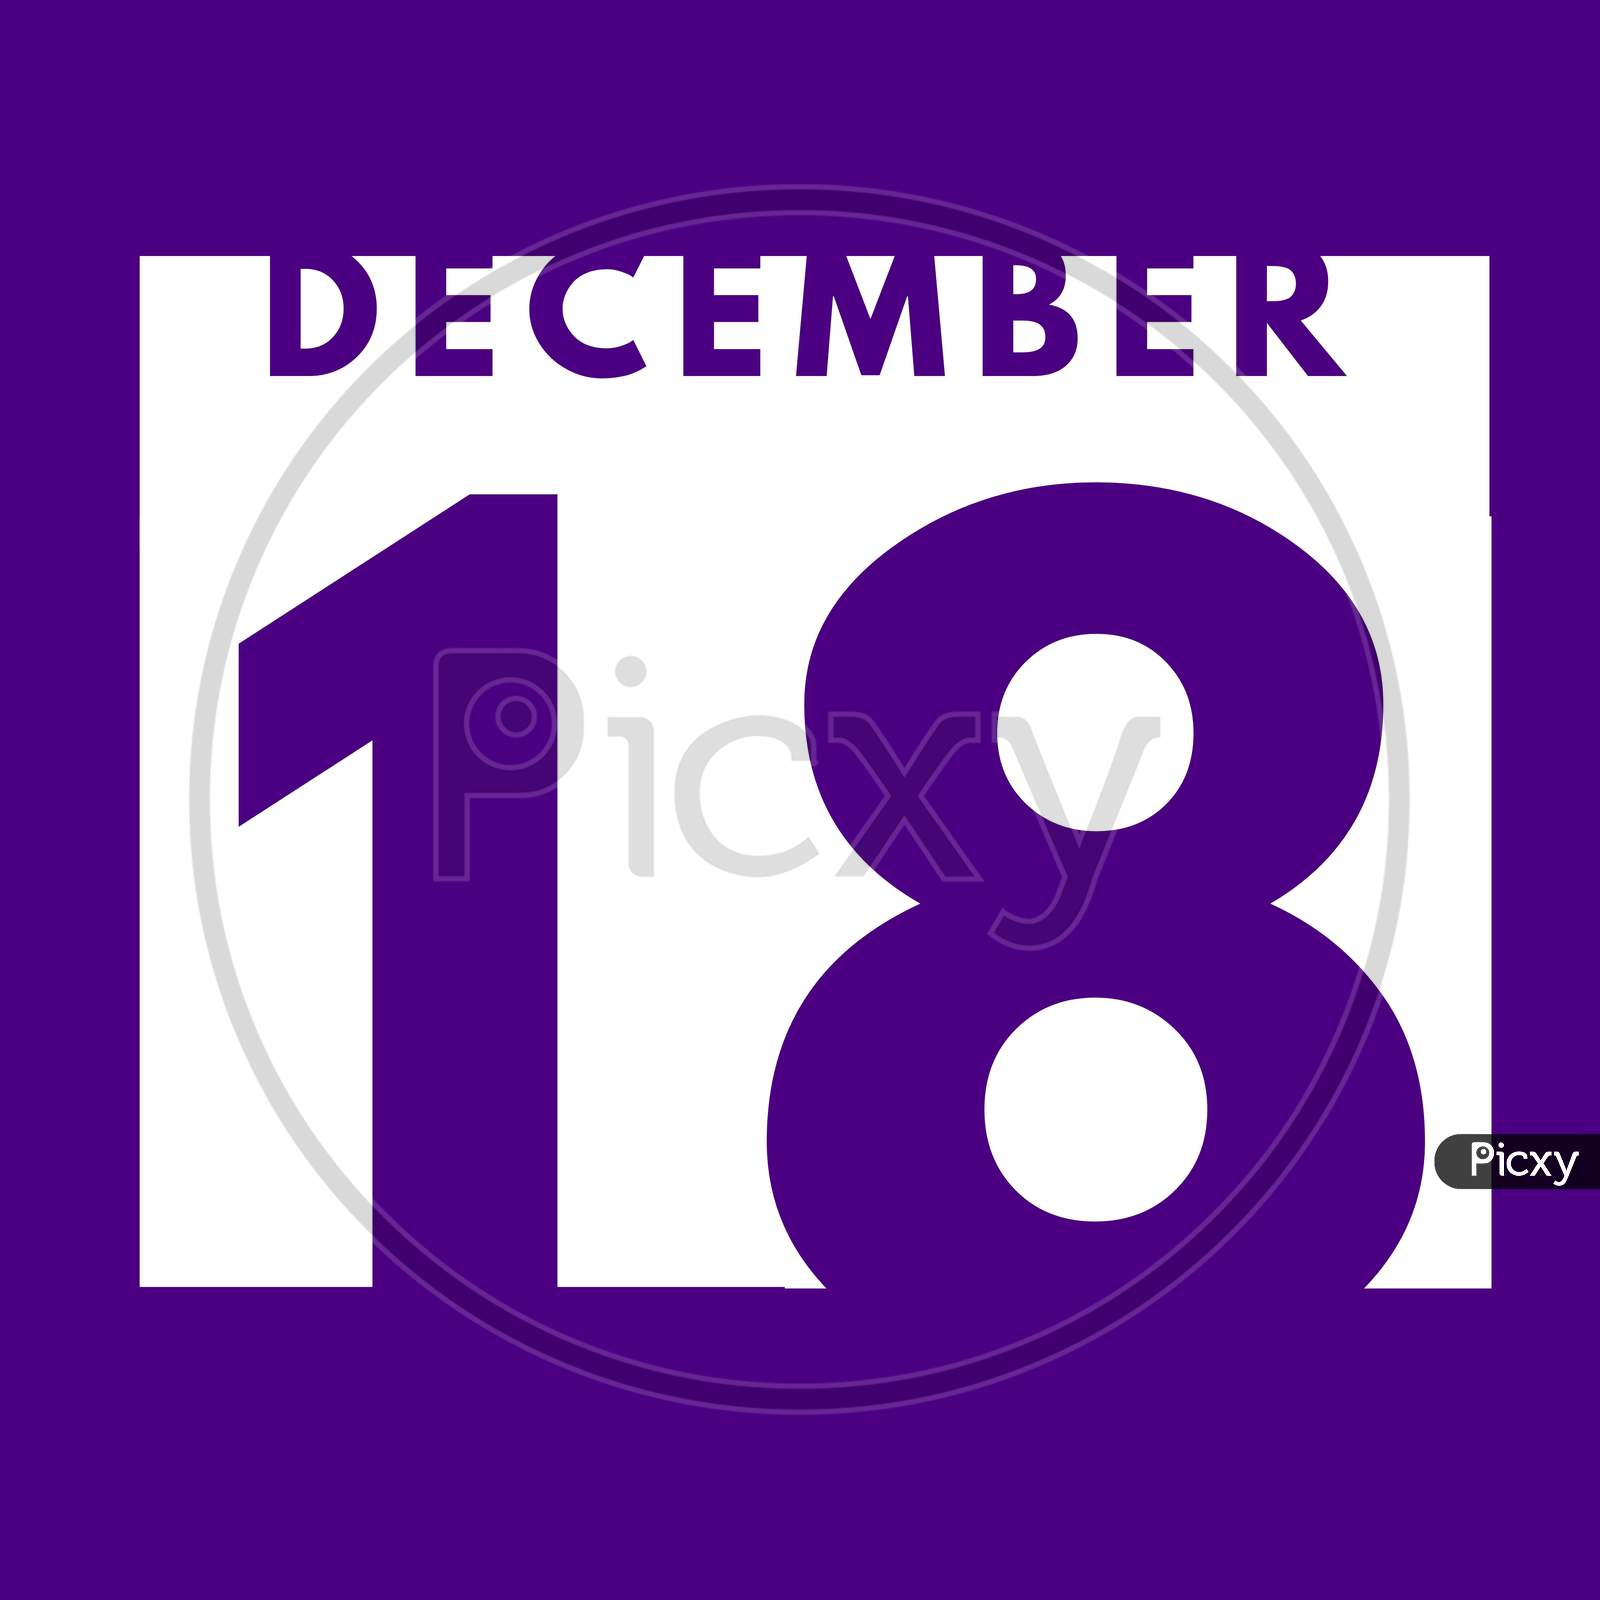 December 18 . Flat Modern Daily Calendar Icon .Date ,Day, Month .Calendar For The Month Of December